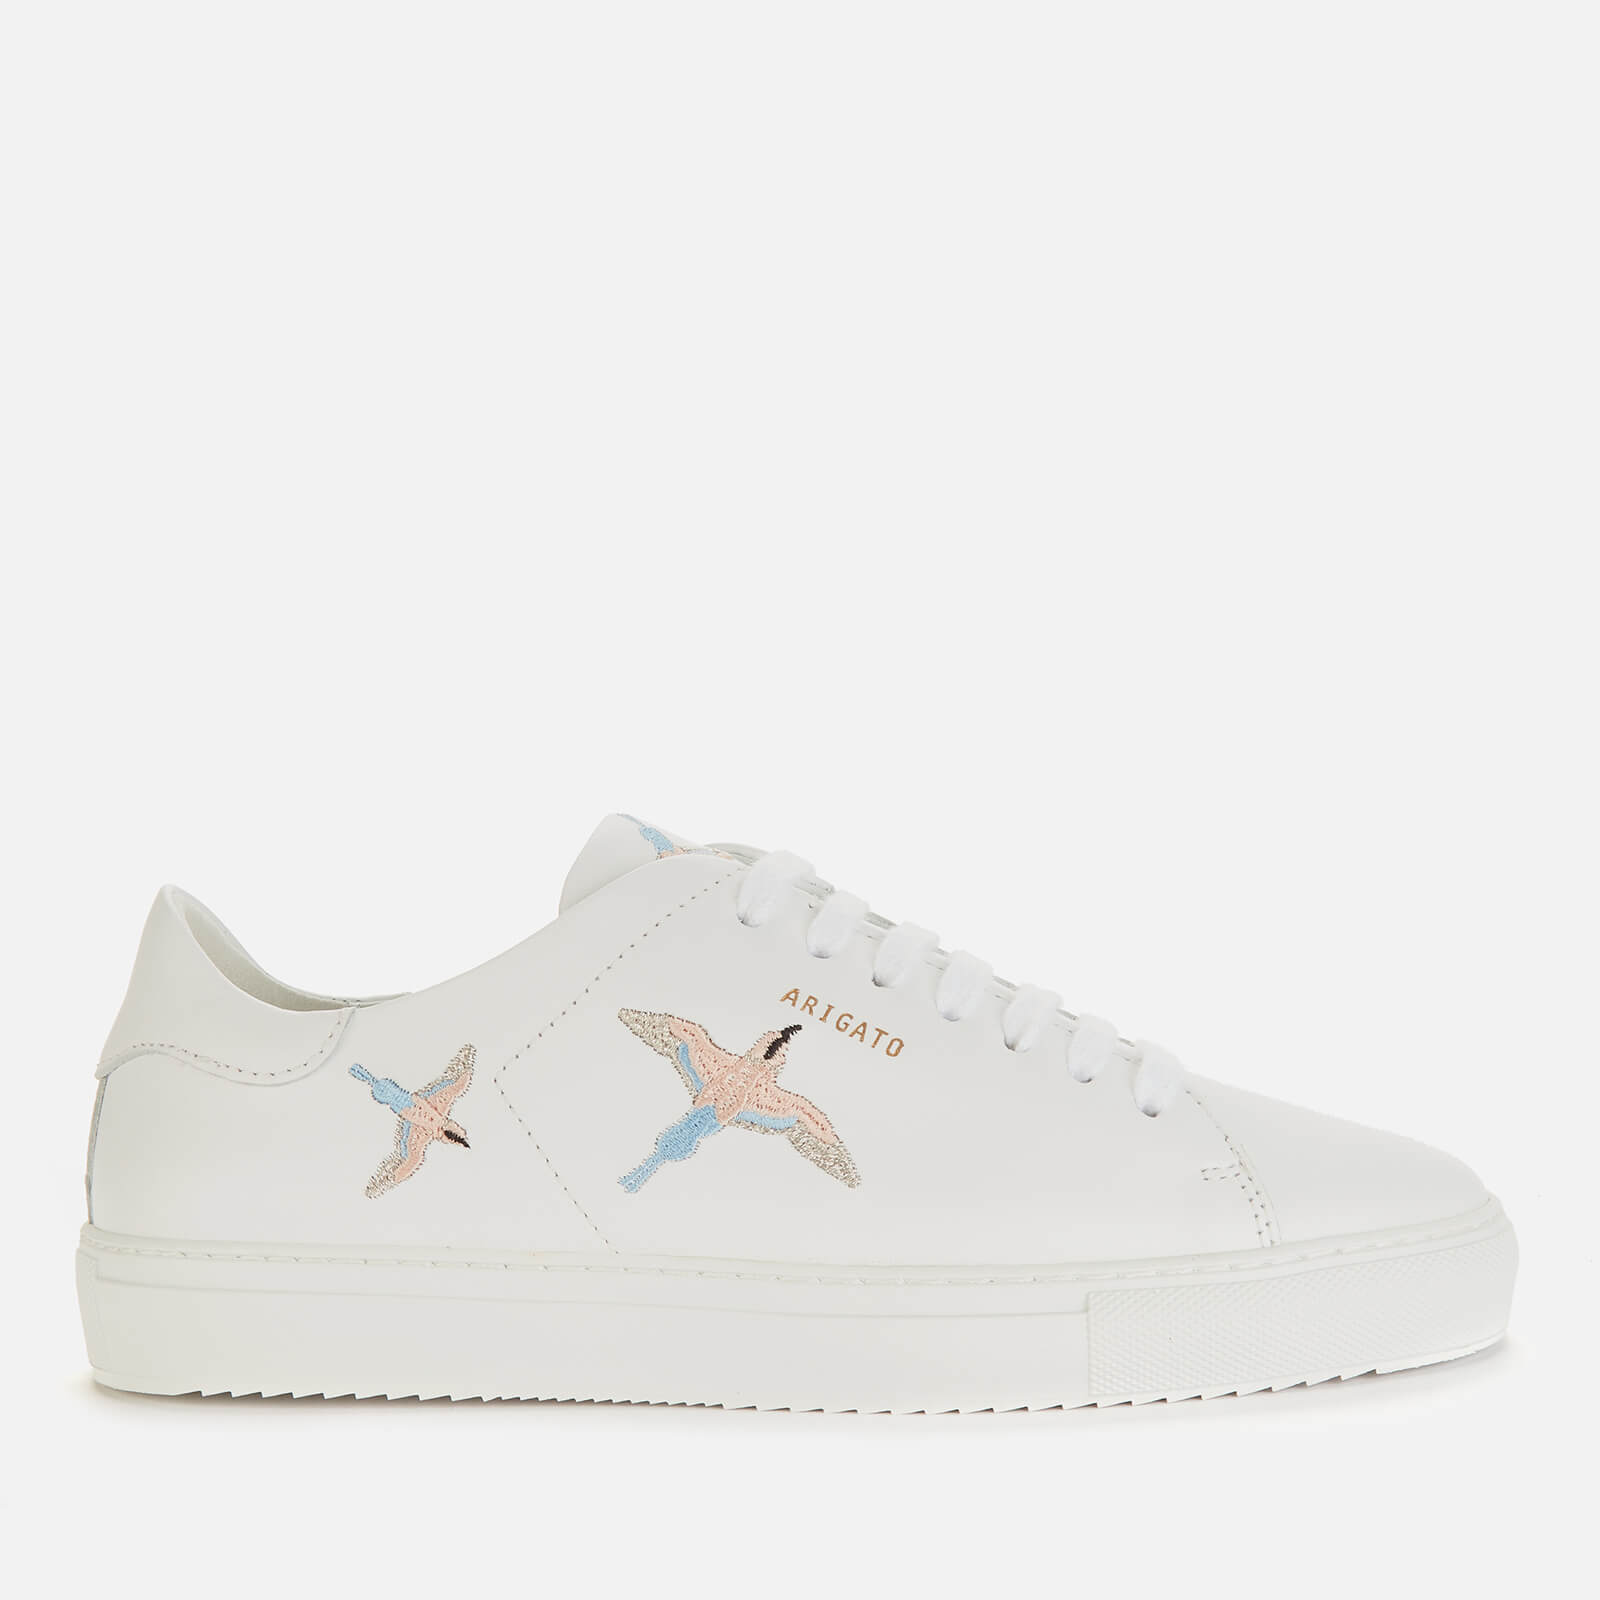 Axel Arigato Women's Clean 90 Bird Leather Cupsole Trainers - White/Blue/Pink - UK 6